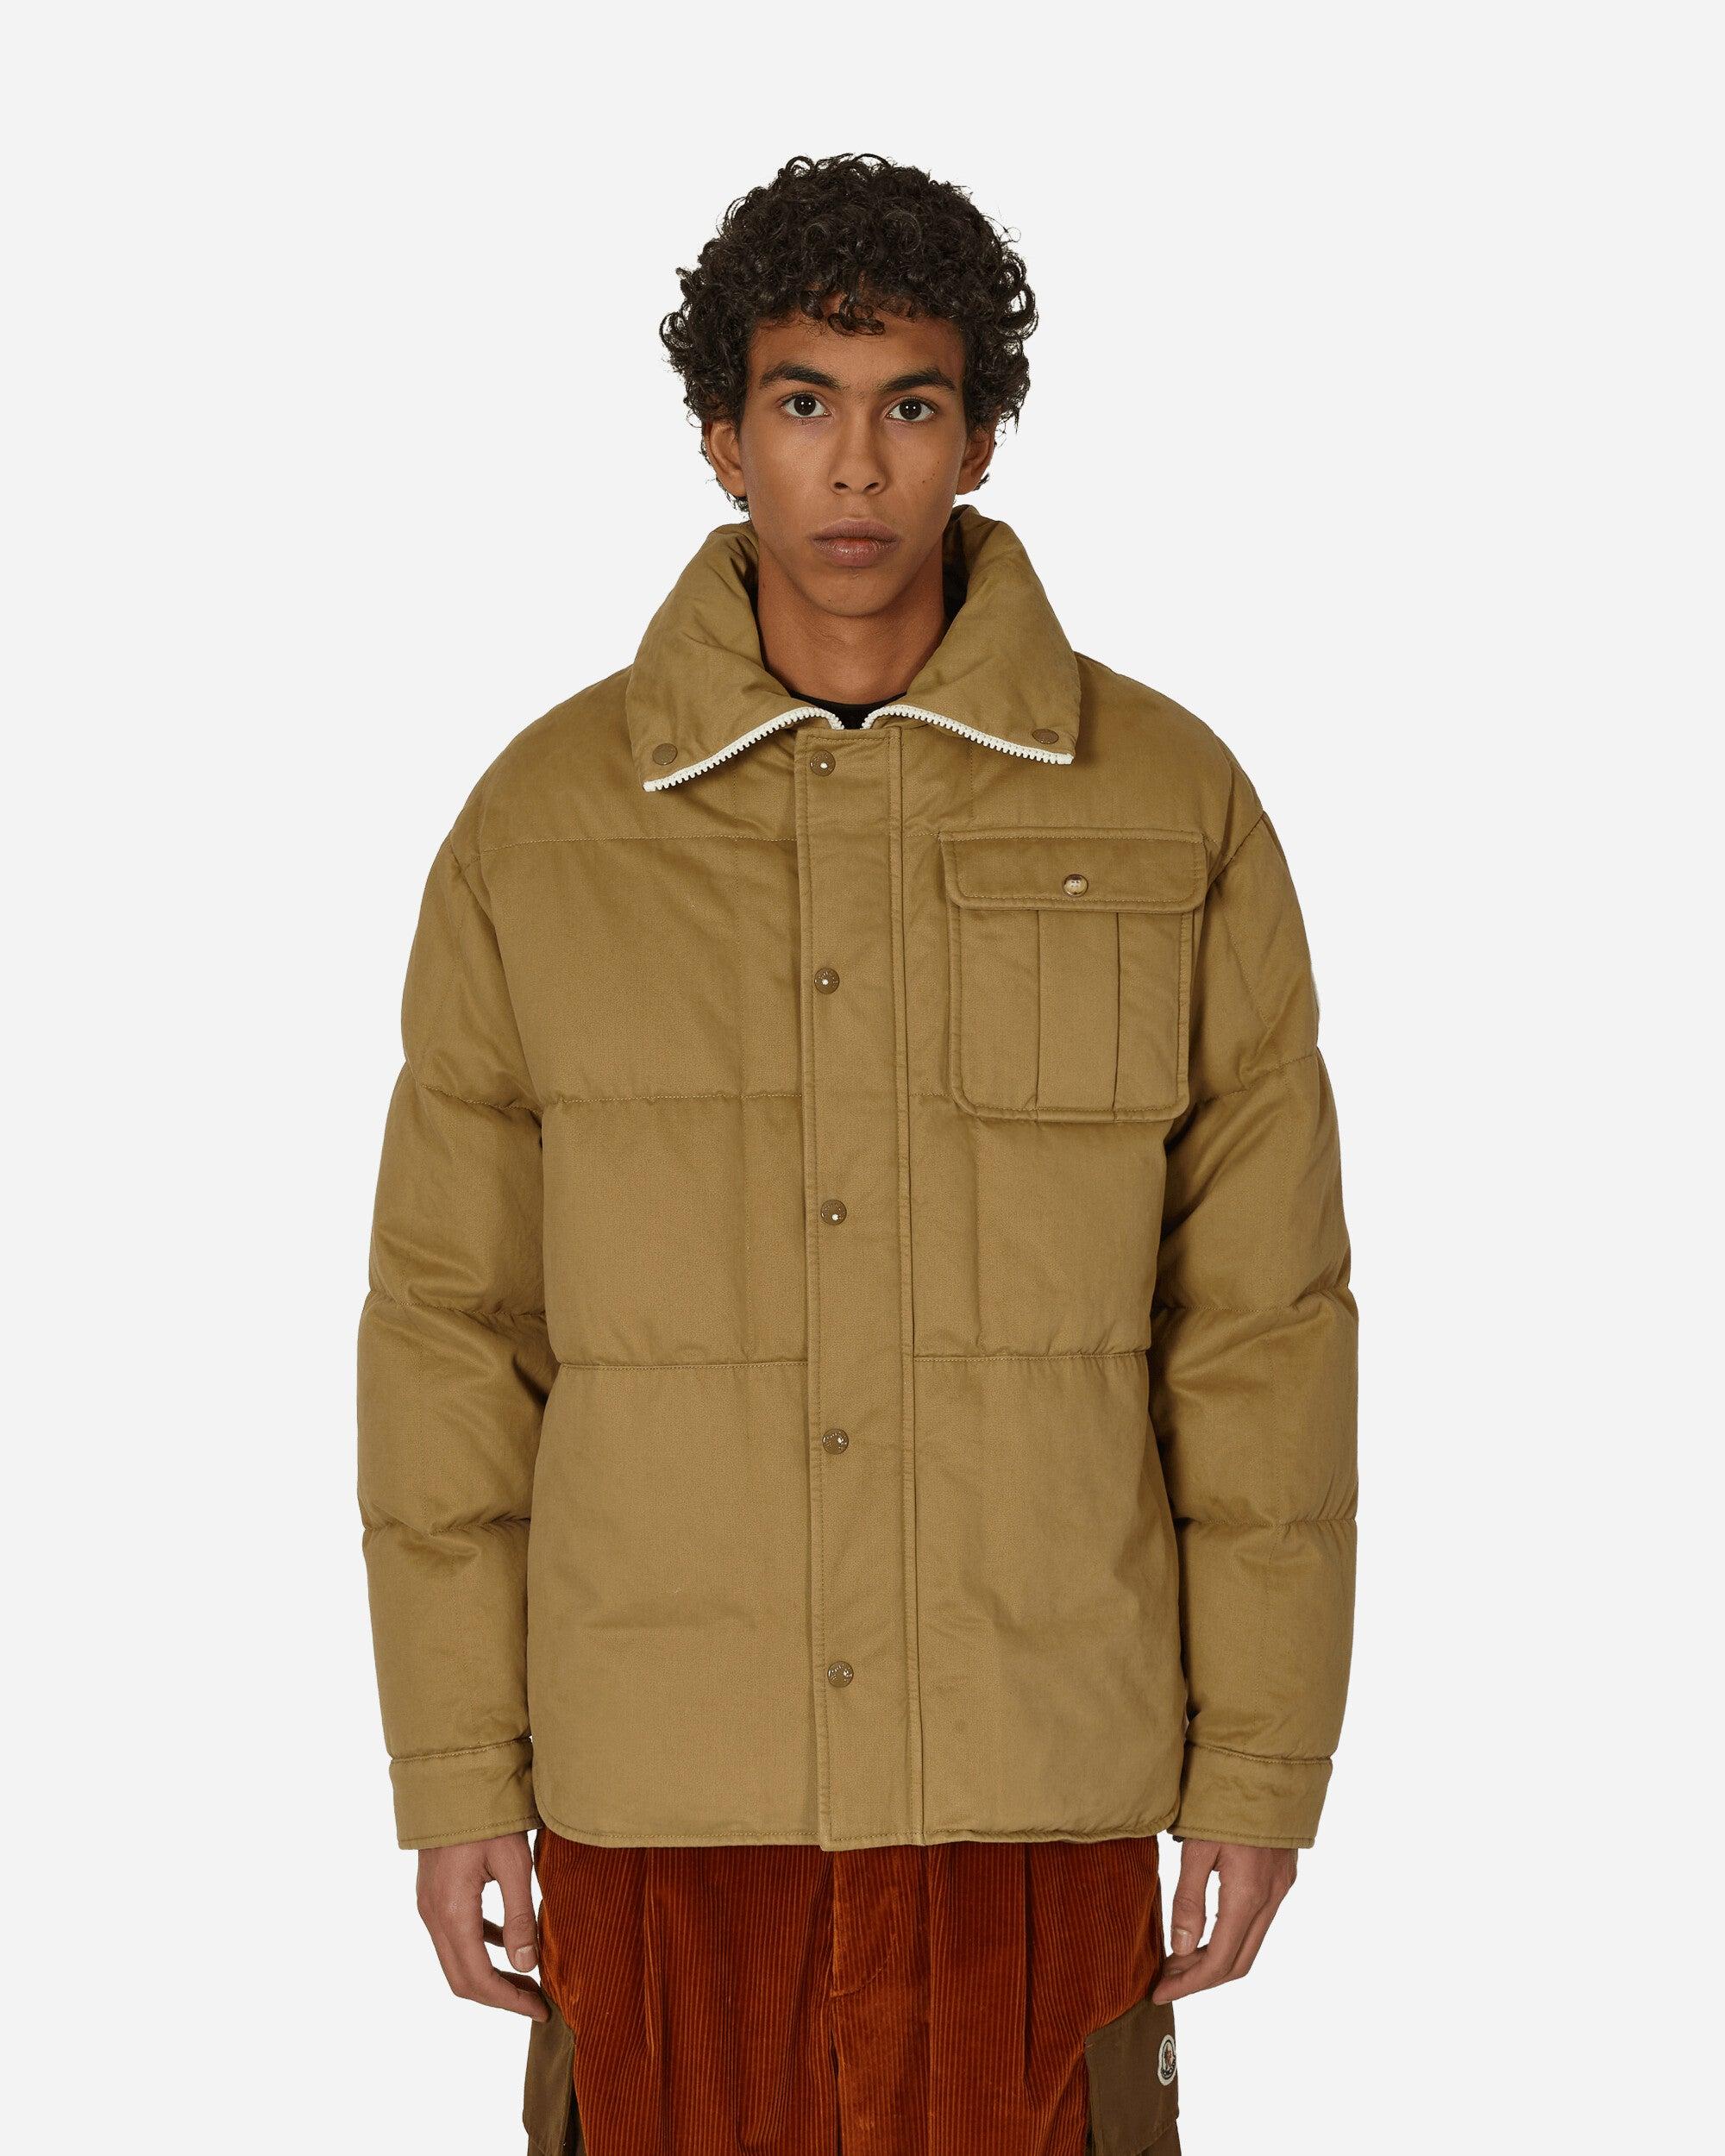 Moncler Genius Palm Angels Fieldrush Down Jacket in Green for Men | Lyst